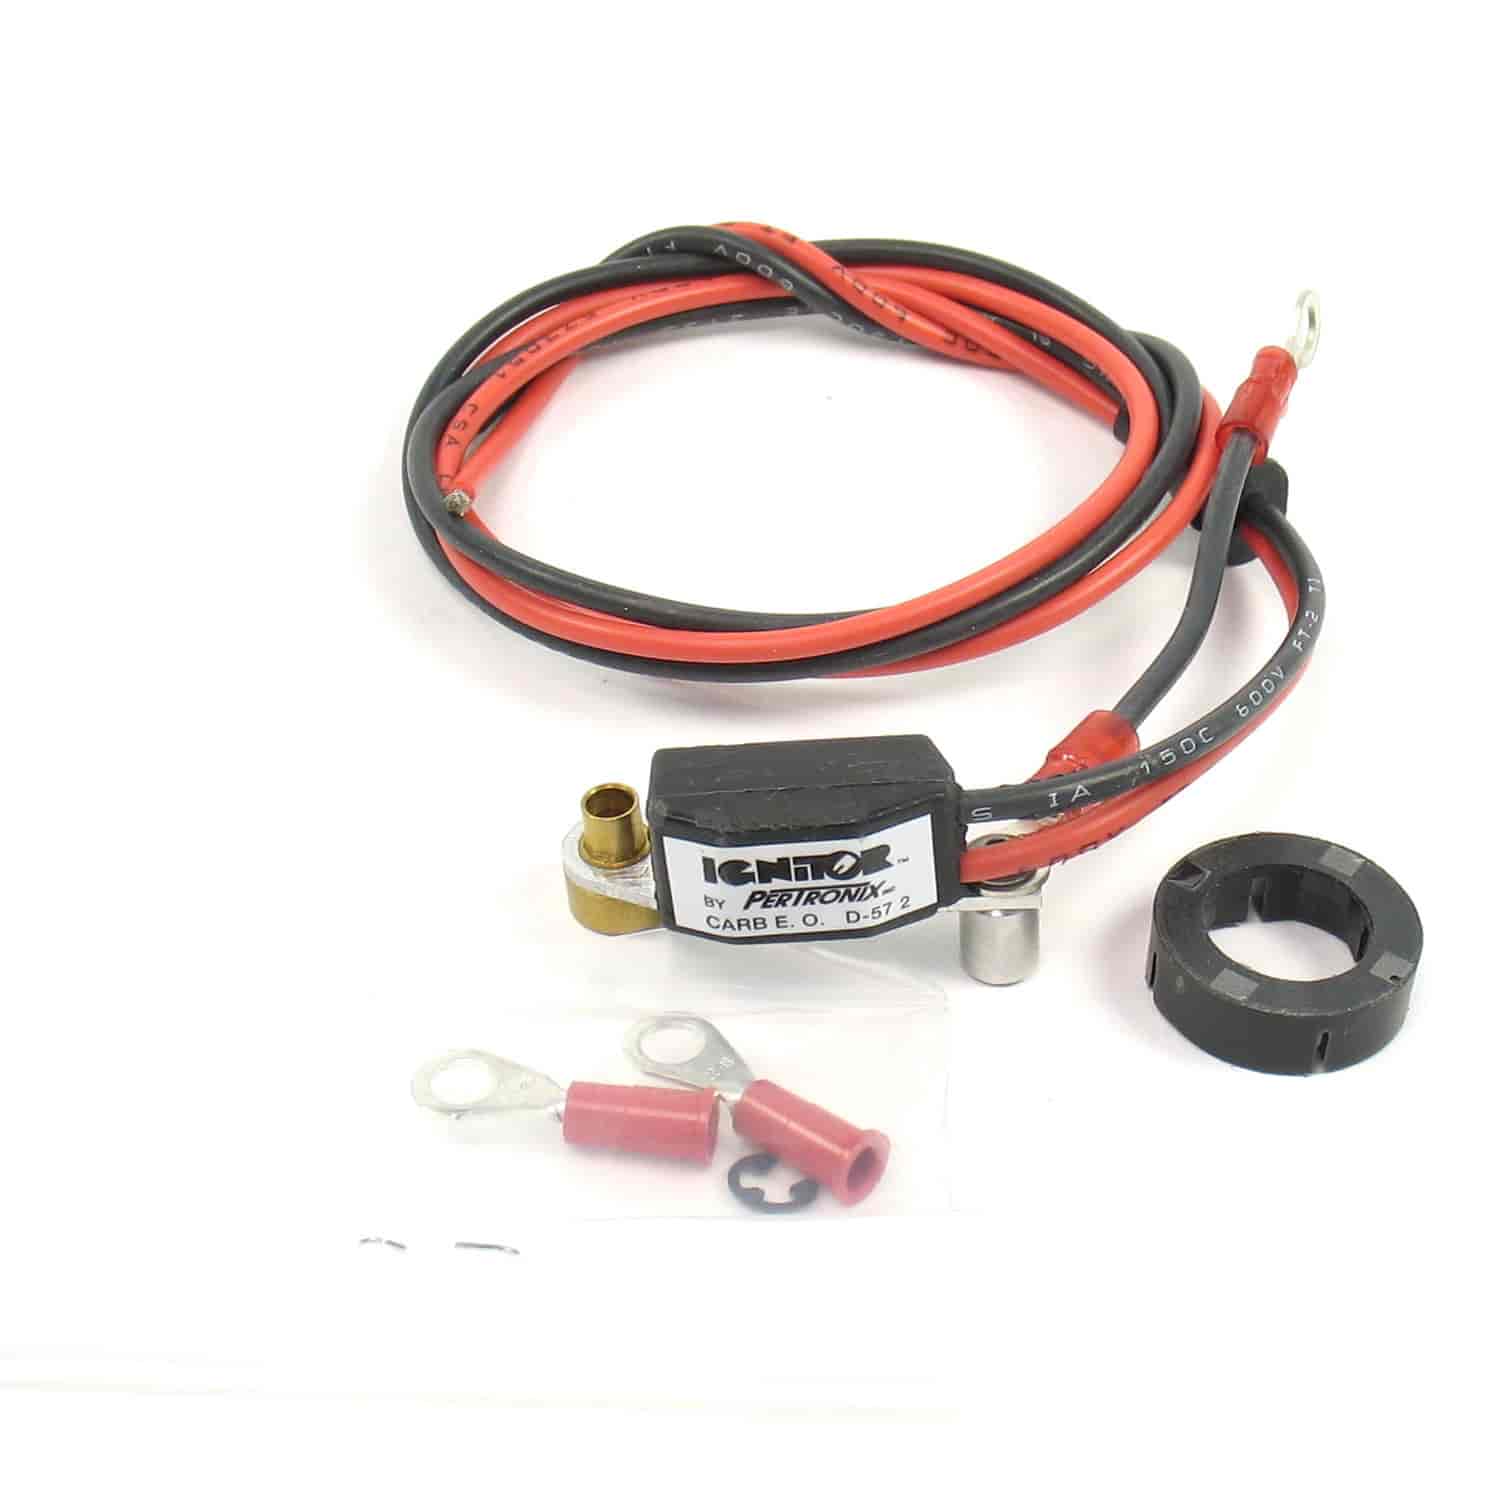 Ignitor Ducellier NEG Grd 6v Carb Approved D-57-22